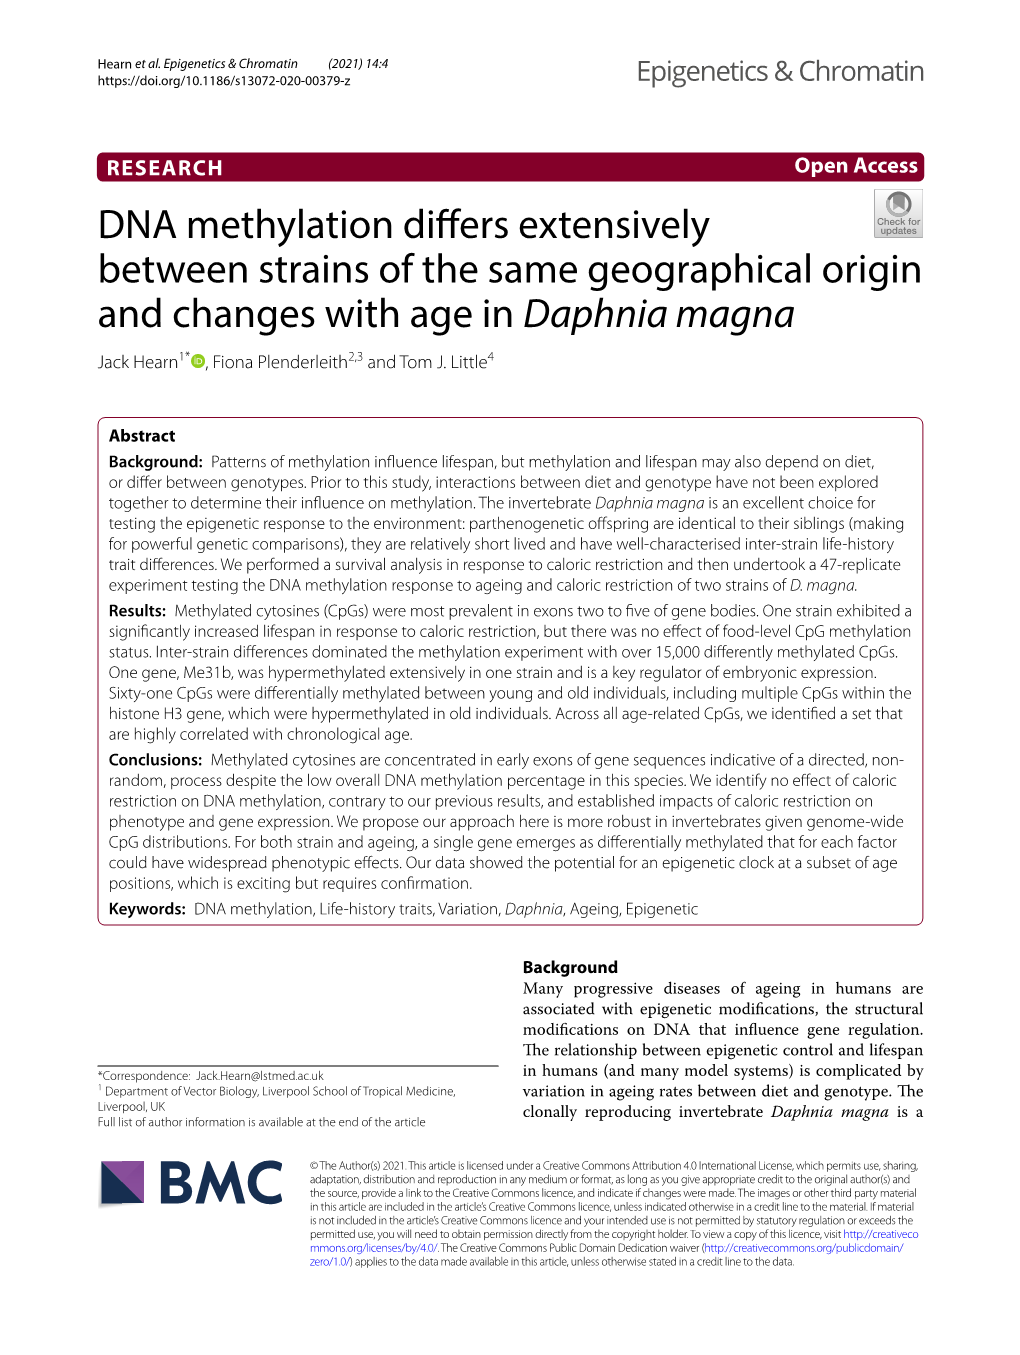 DNA Methylation Differs Extensively Between Strains of the Same